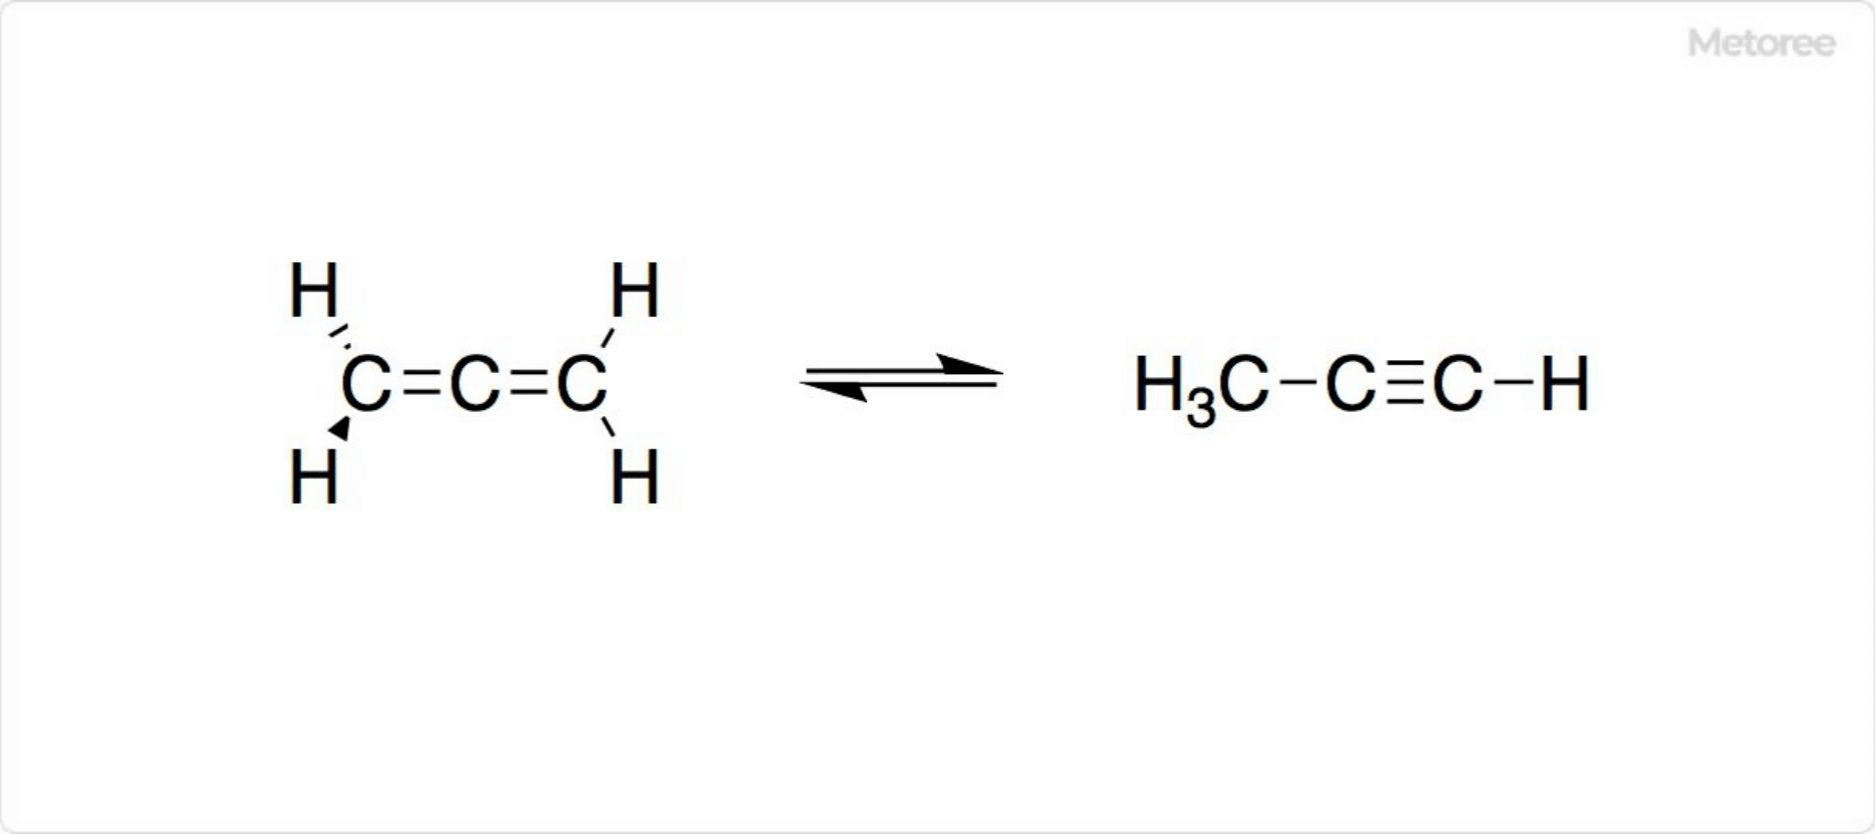 Figure 2: Synthesis of Allene